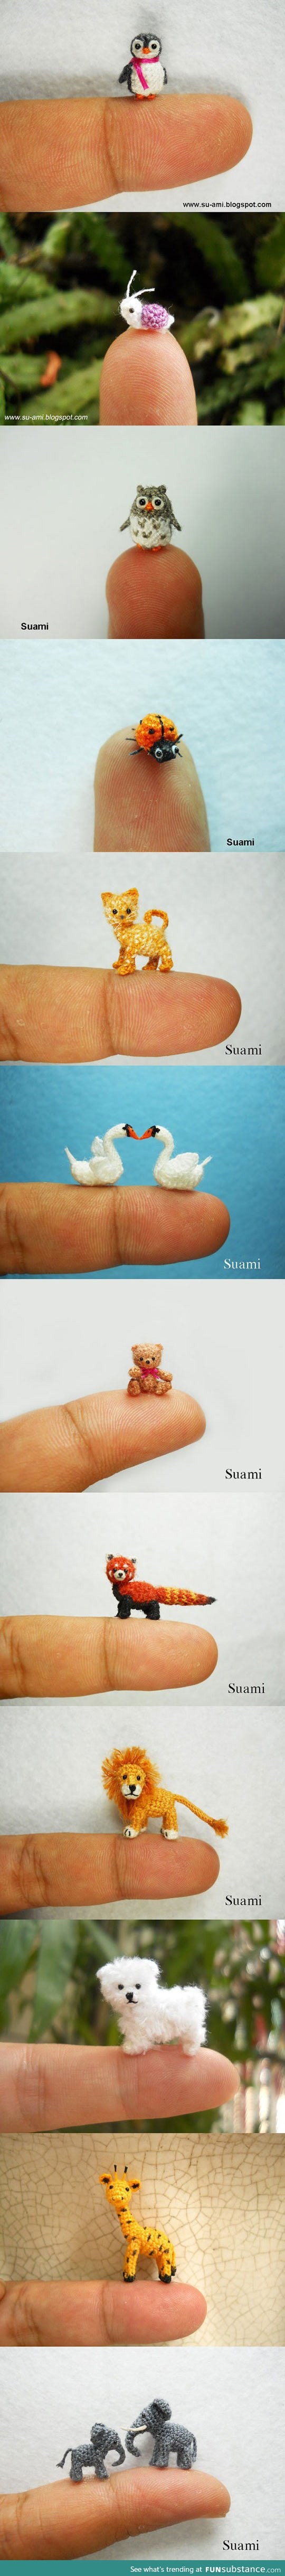 The tiniest animals by Suami